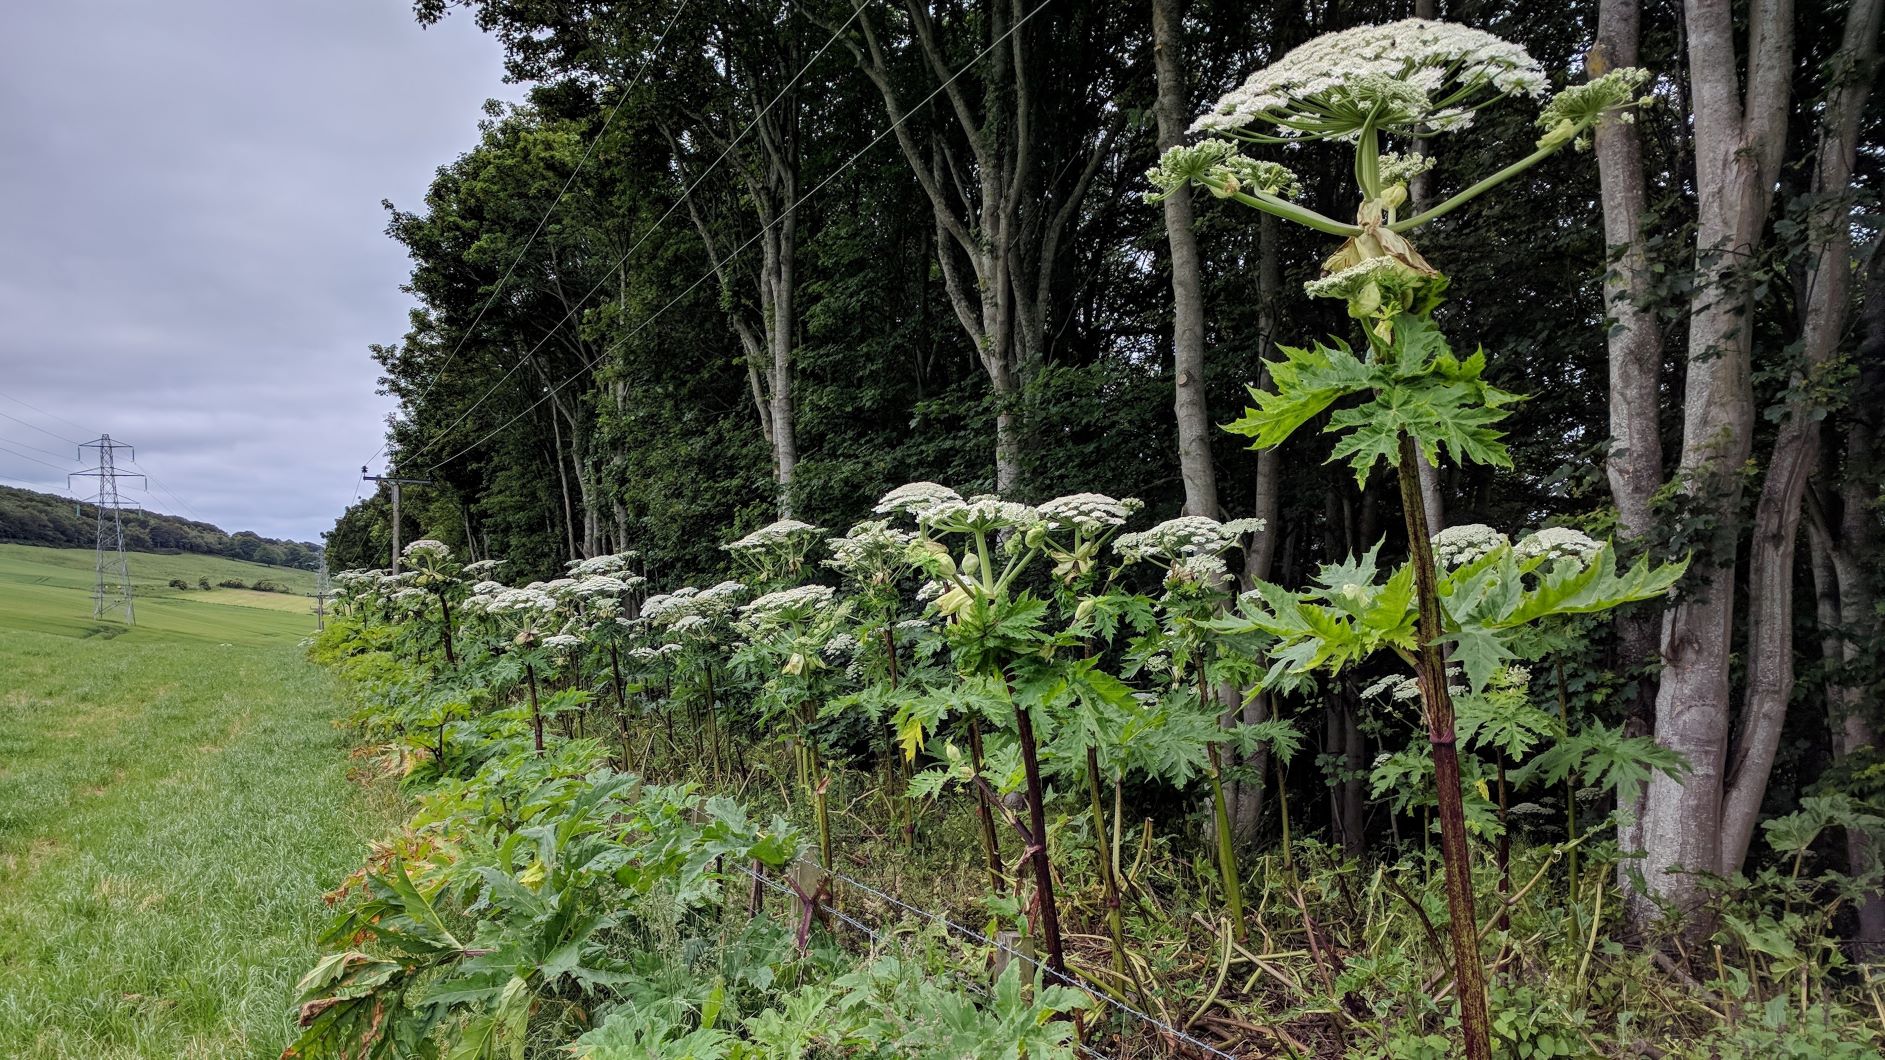 Giant hogweed flowers along an extensive fenceline at trial site